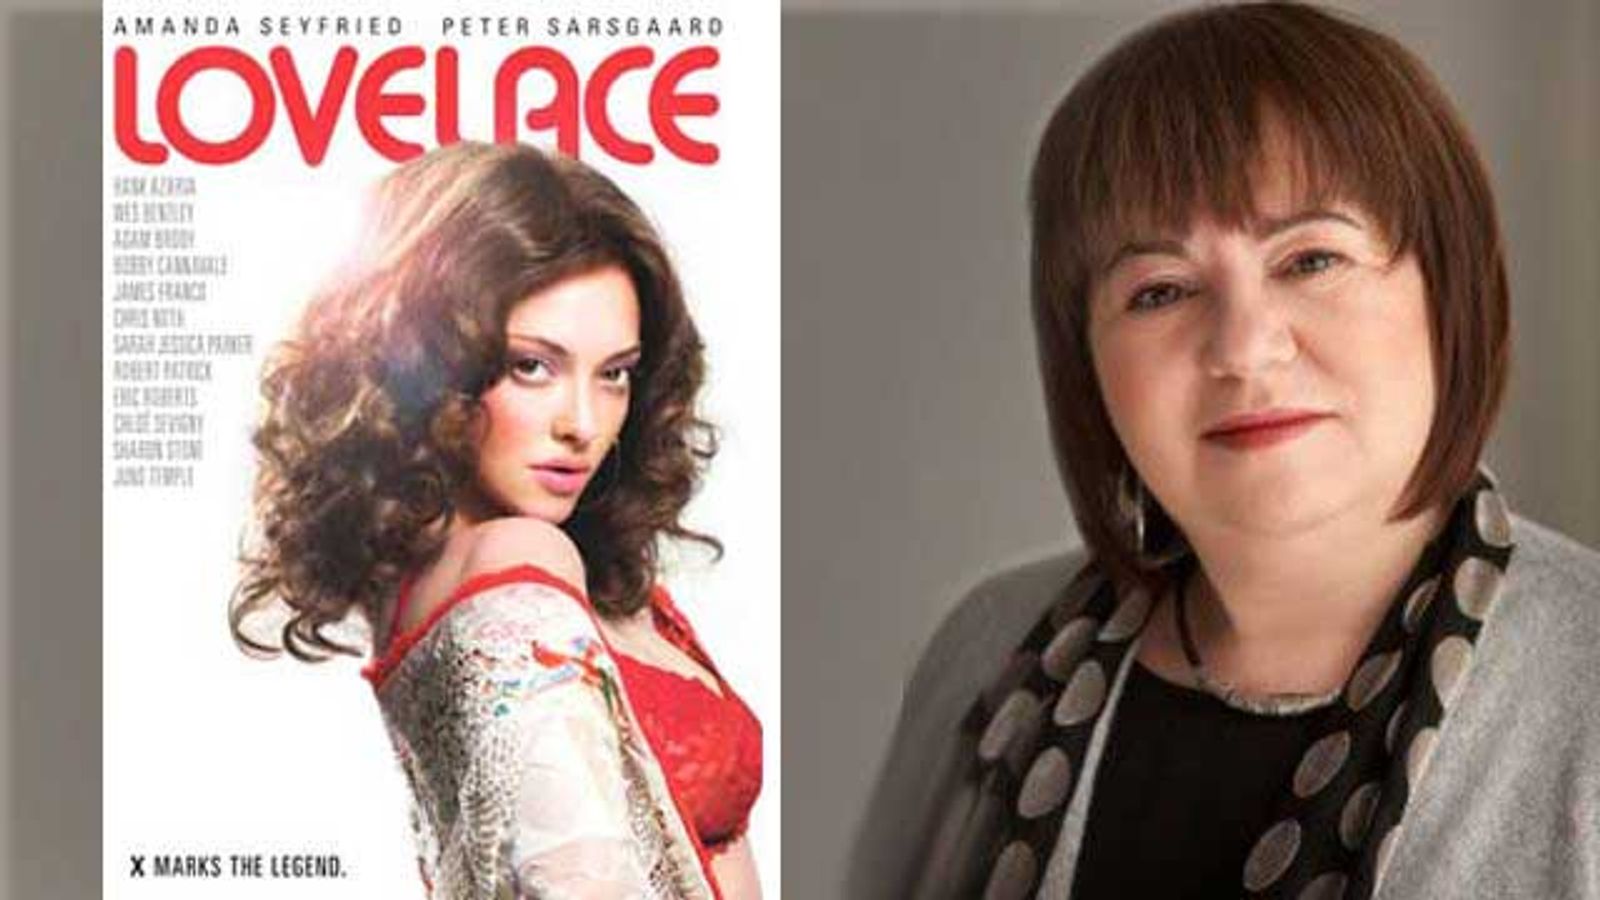 The Telegraph Asks ‘Film Critic’ Gail Dines About ‘Lovelace’